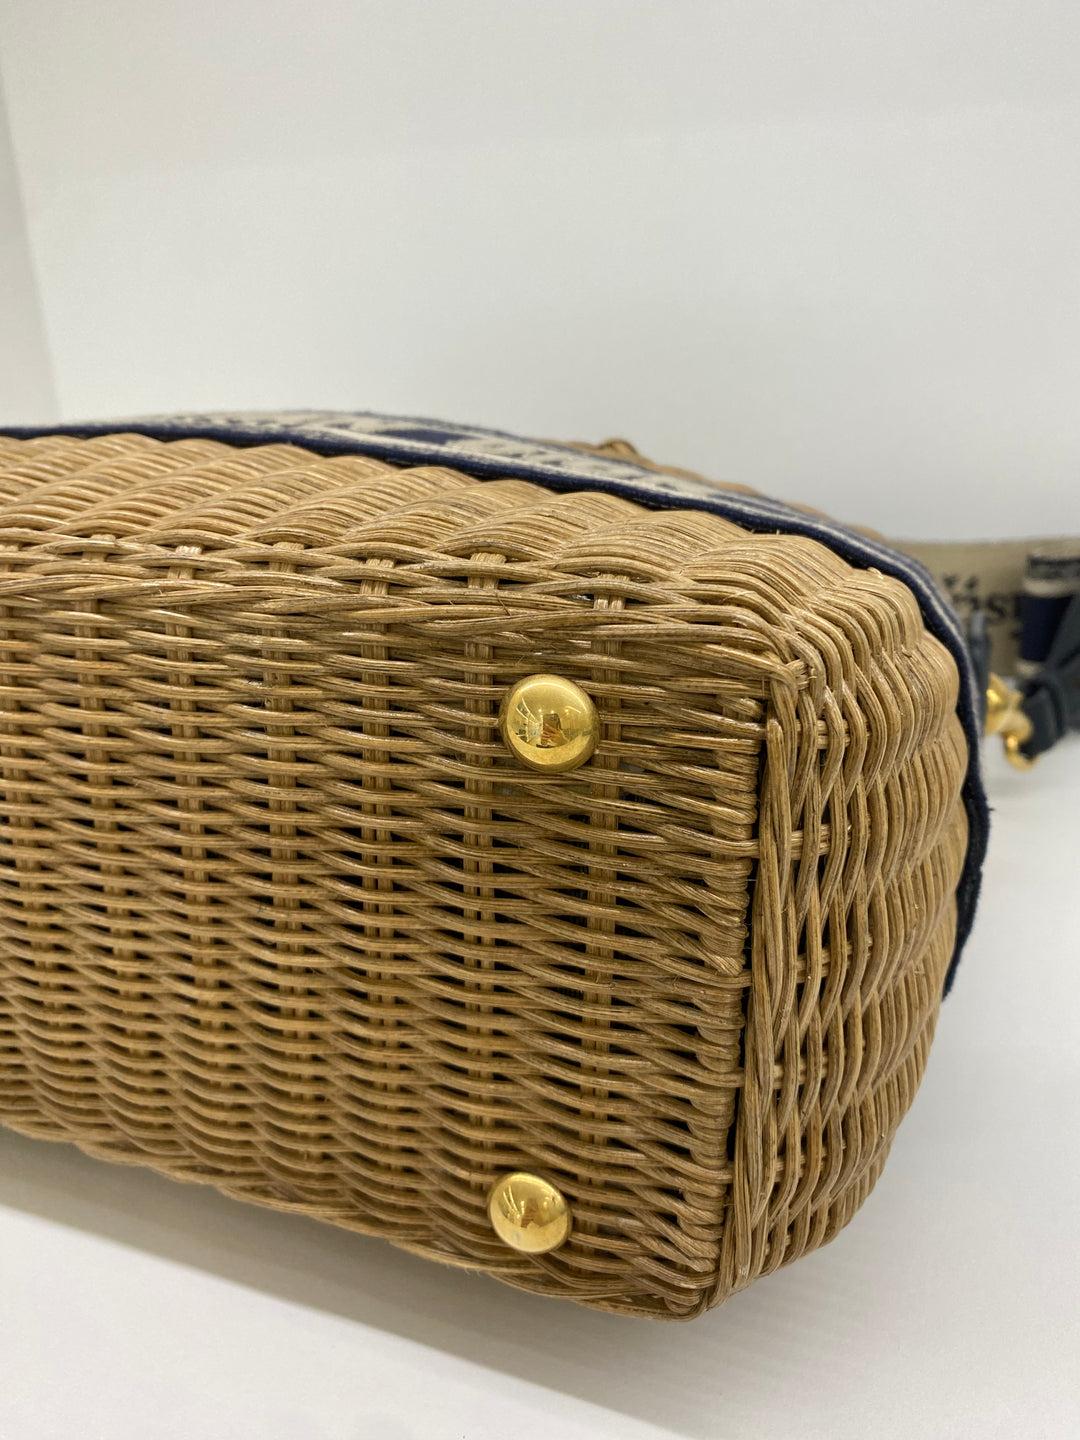 Christian Dior Wicker Bag For Sale 2